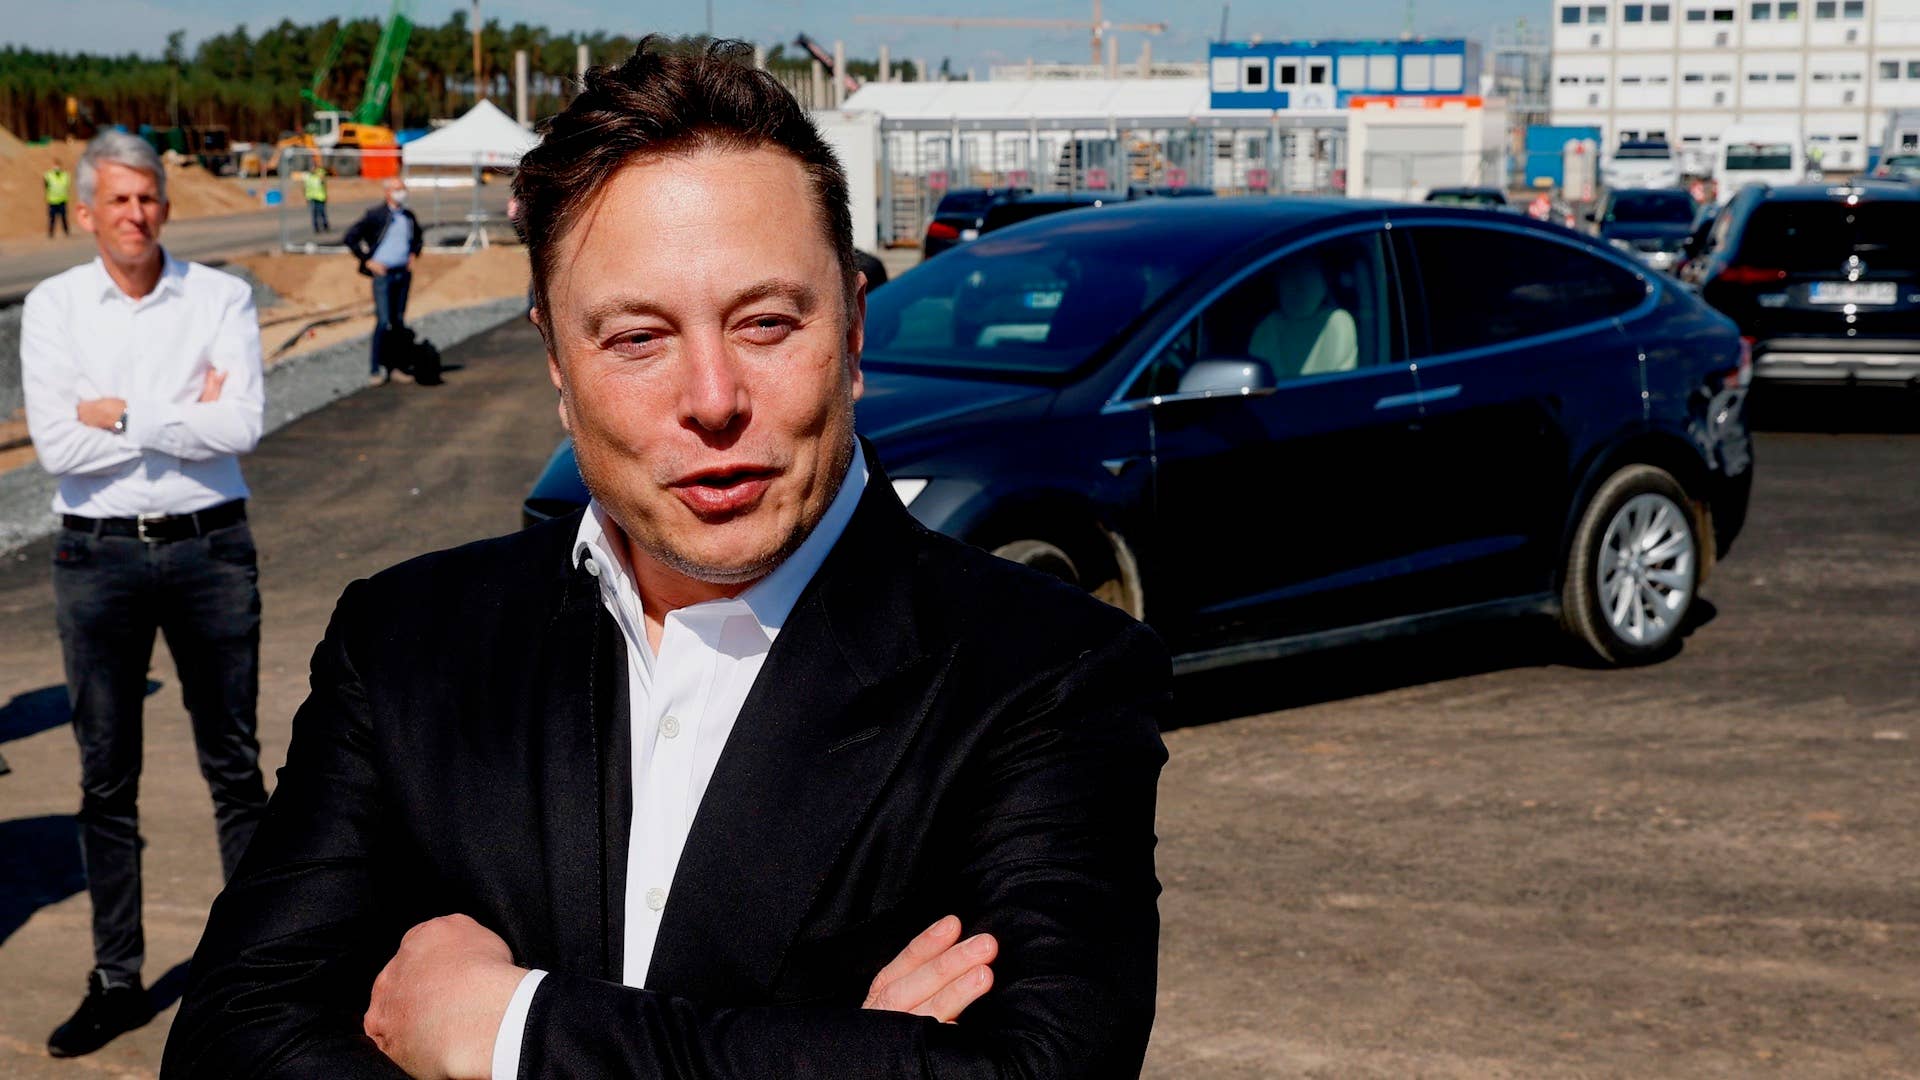 Tesla CEO Elon Musk talks to media as he arrives to visit the construction site of the future US electric car giant Tesla